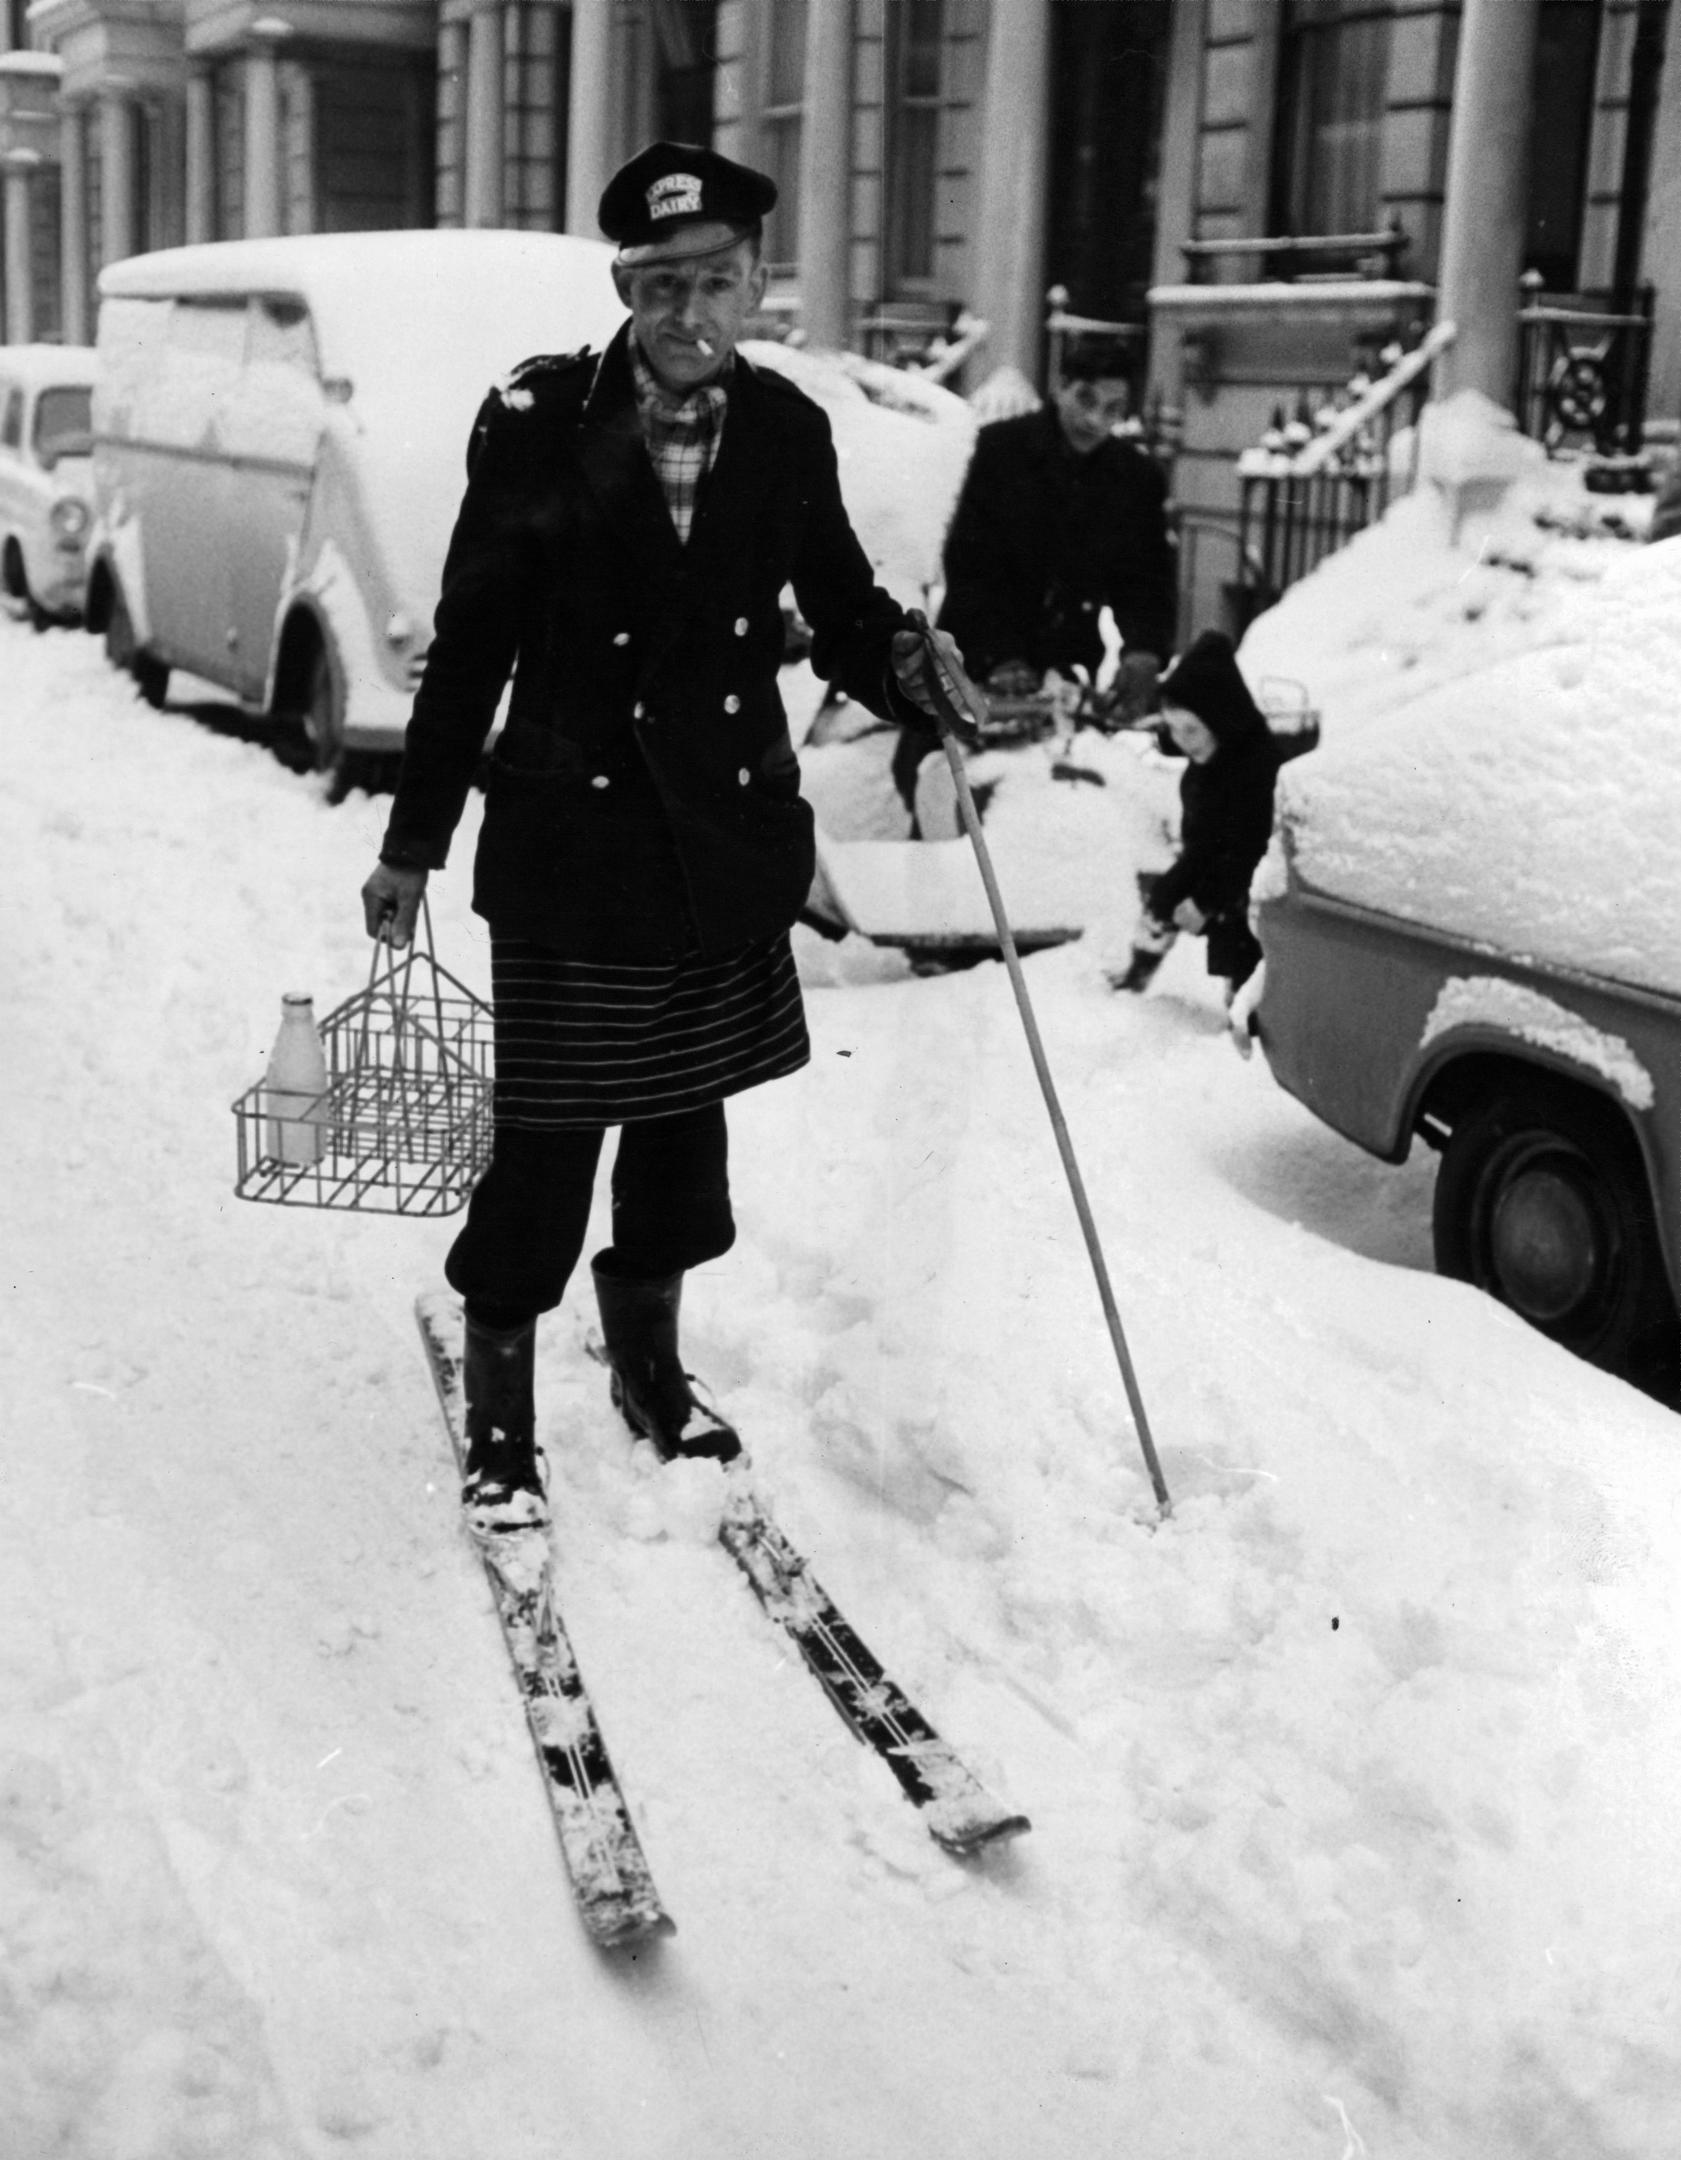 A milkman in London in December 1962 (Express/Hulton Archive/Getty Images)